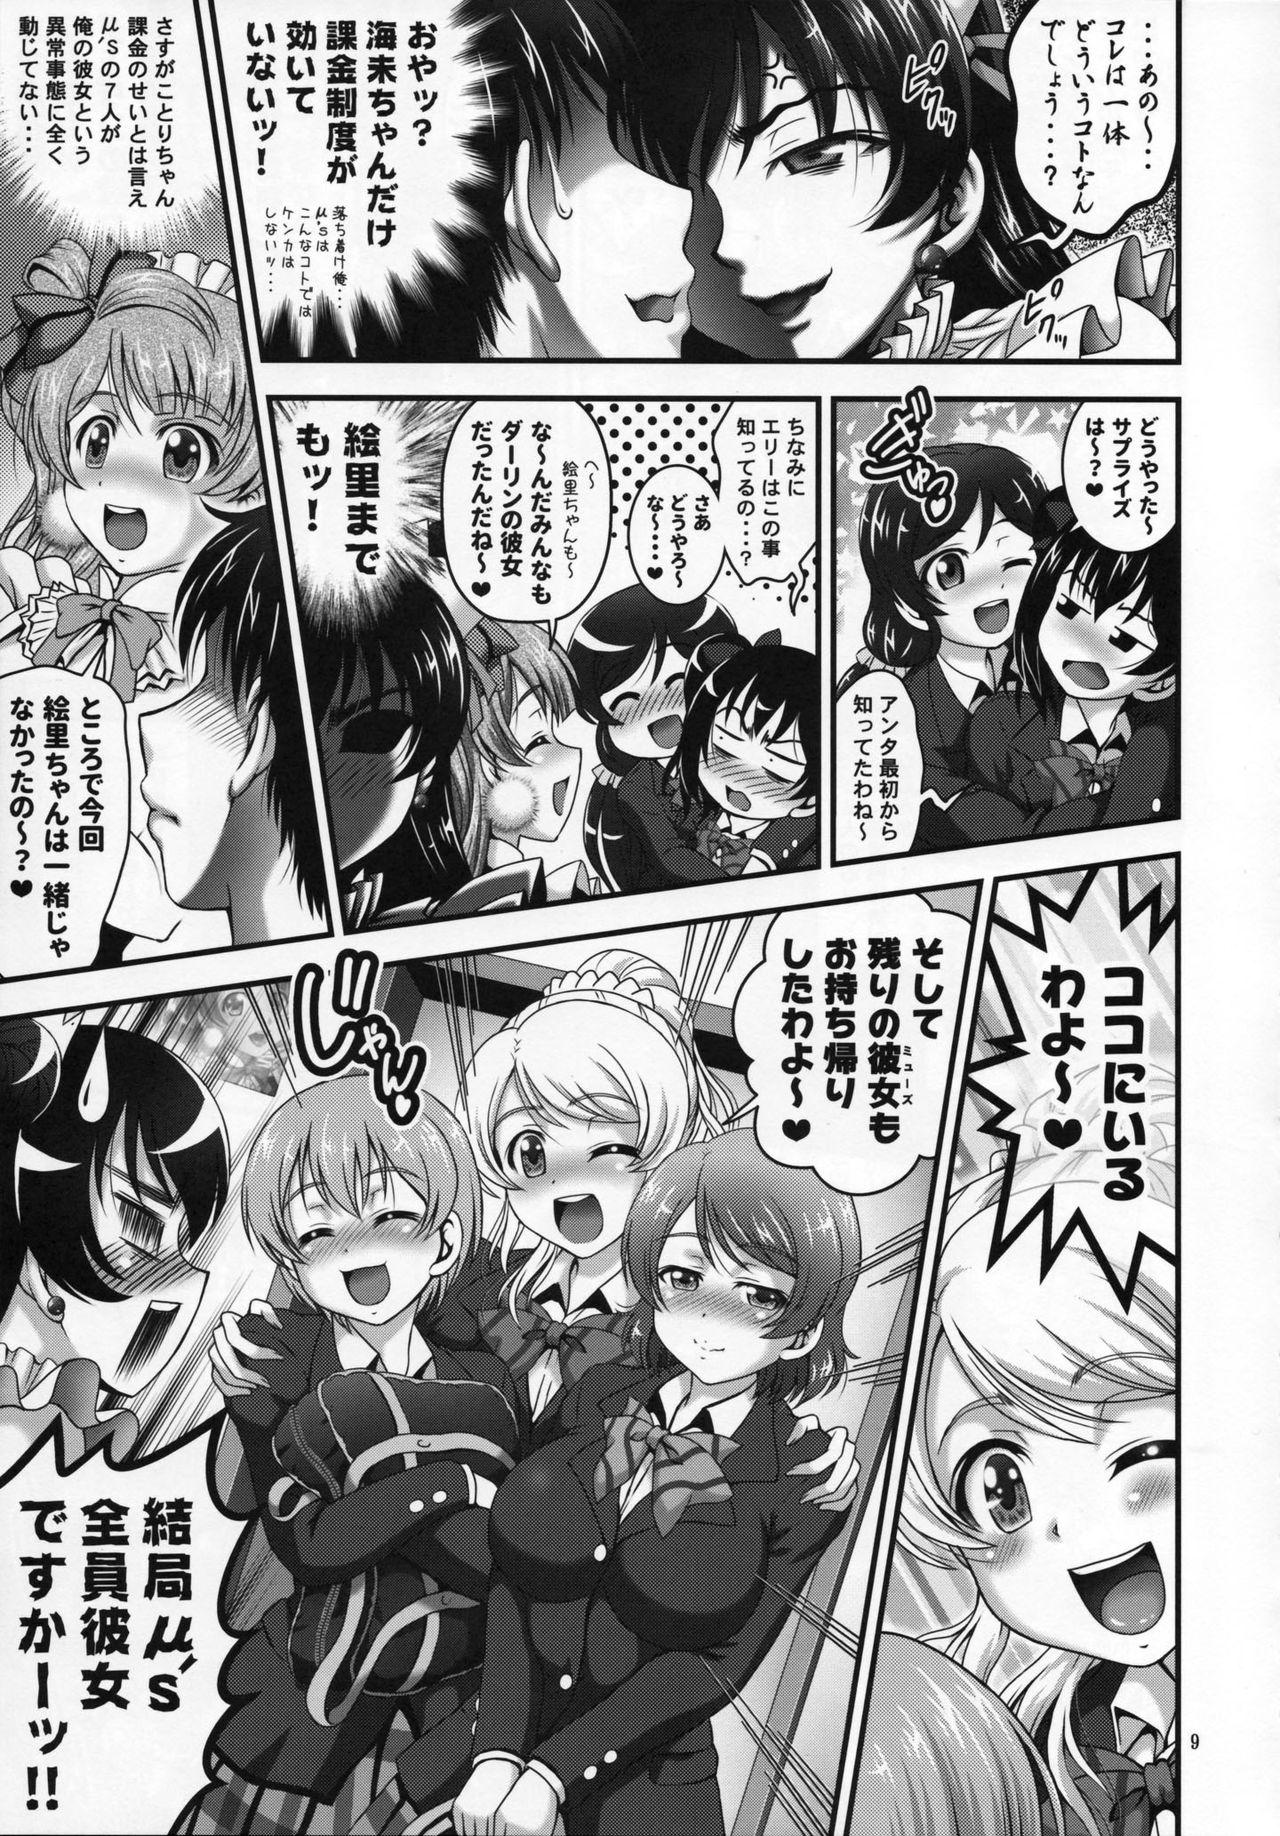 Pigtails Ore Yome Saimin 5 - Love live Small - Page 10